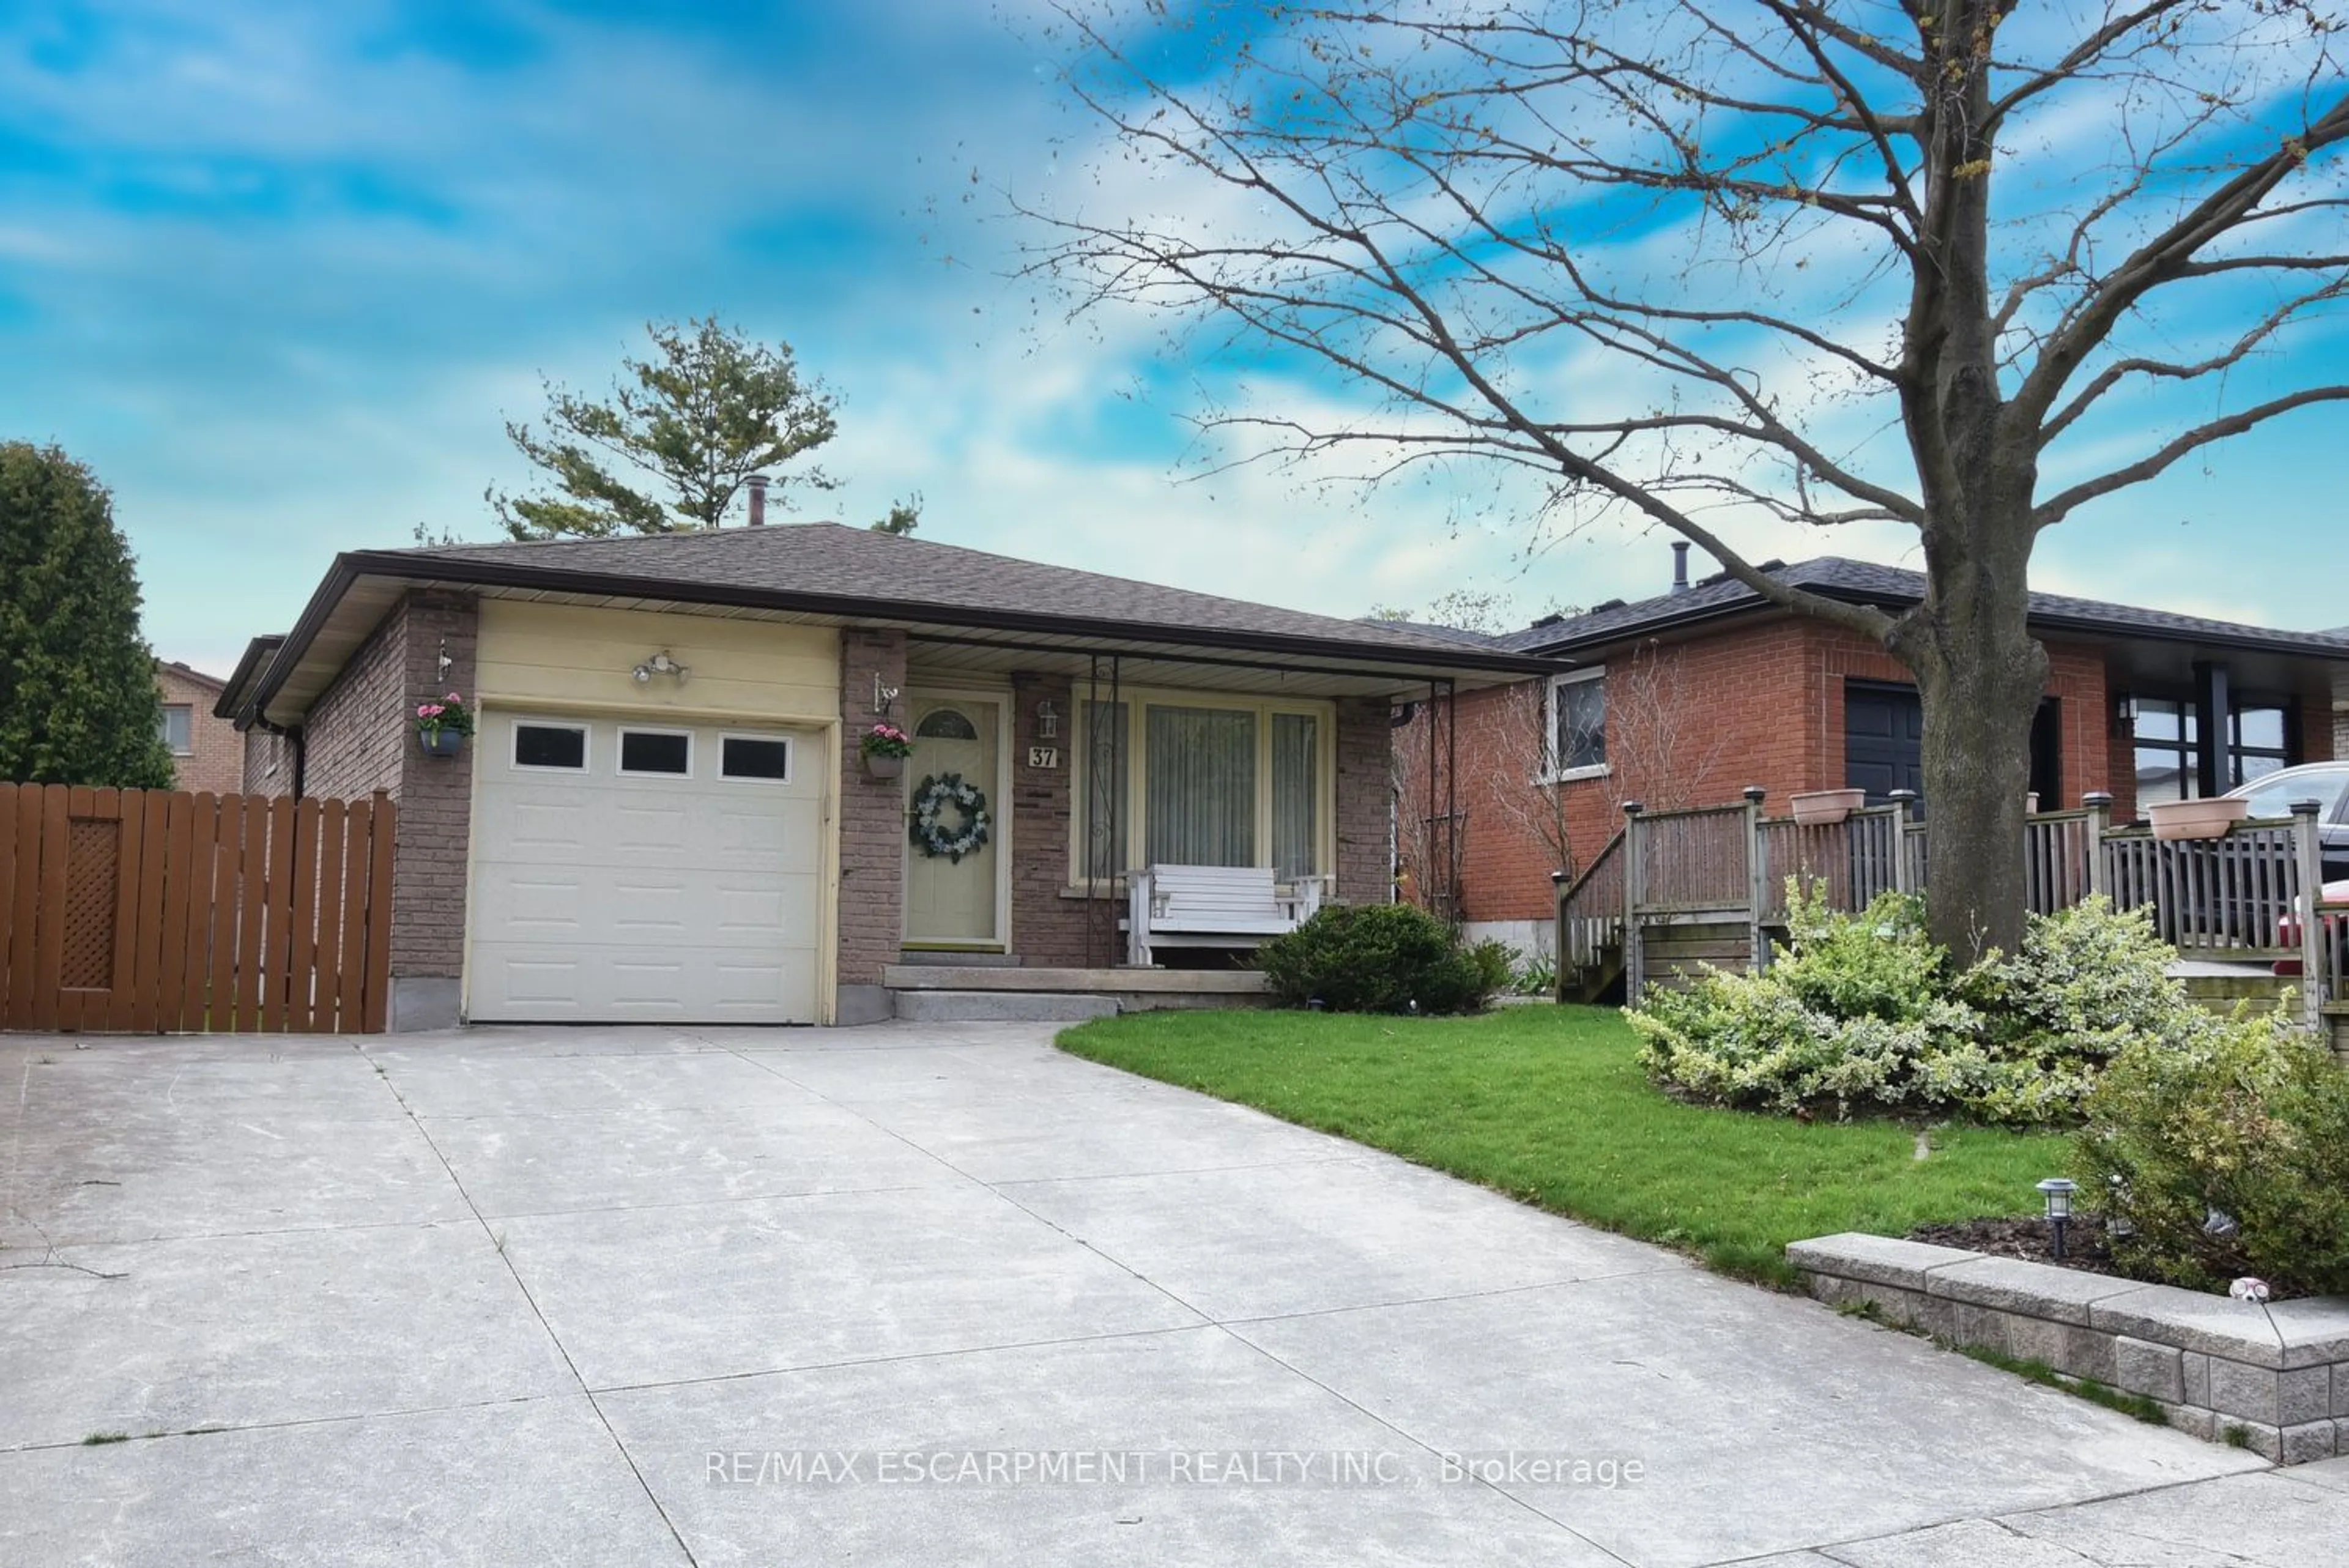 Home with brick exterior material for 37 Anthony St, Hamilton Ontario L9C 6V6